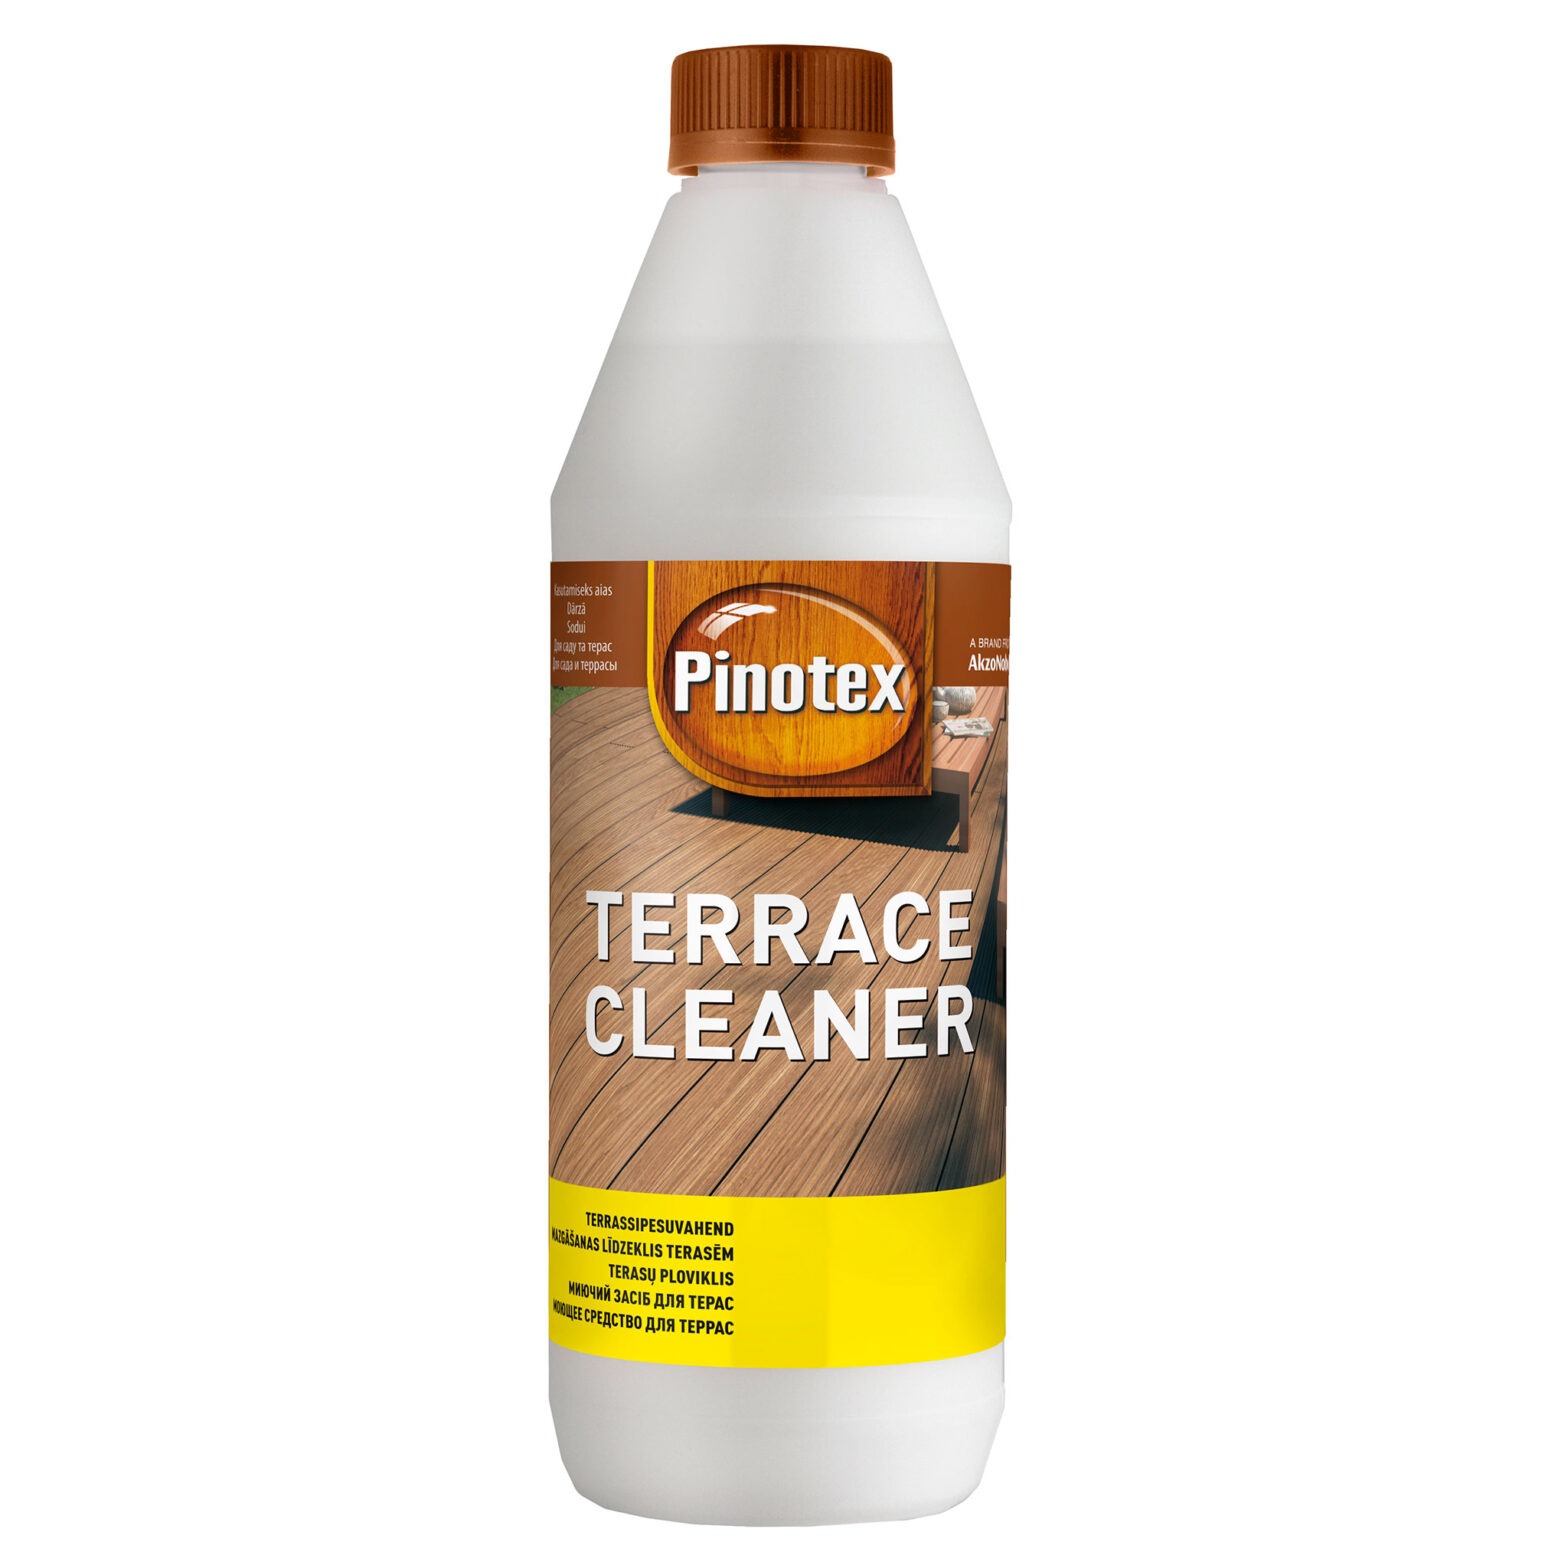 PINOTEX TERRACE CLEANER 5L